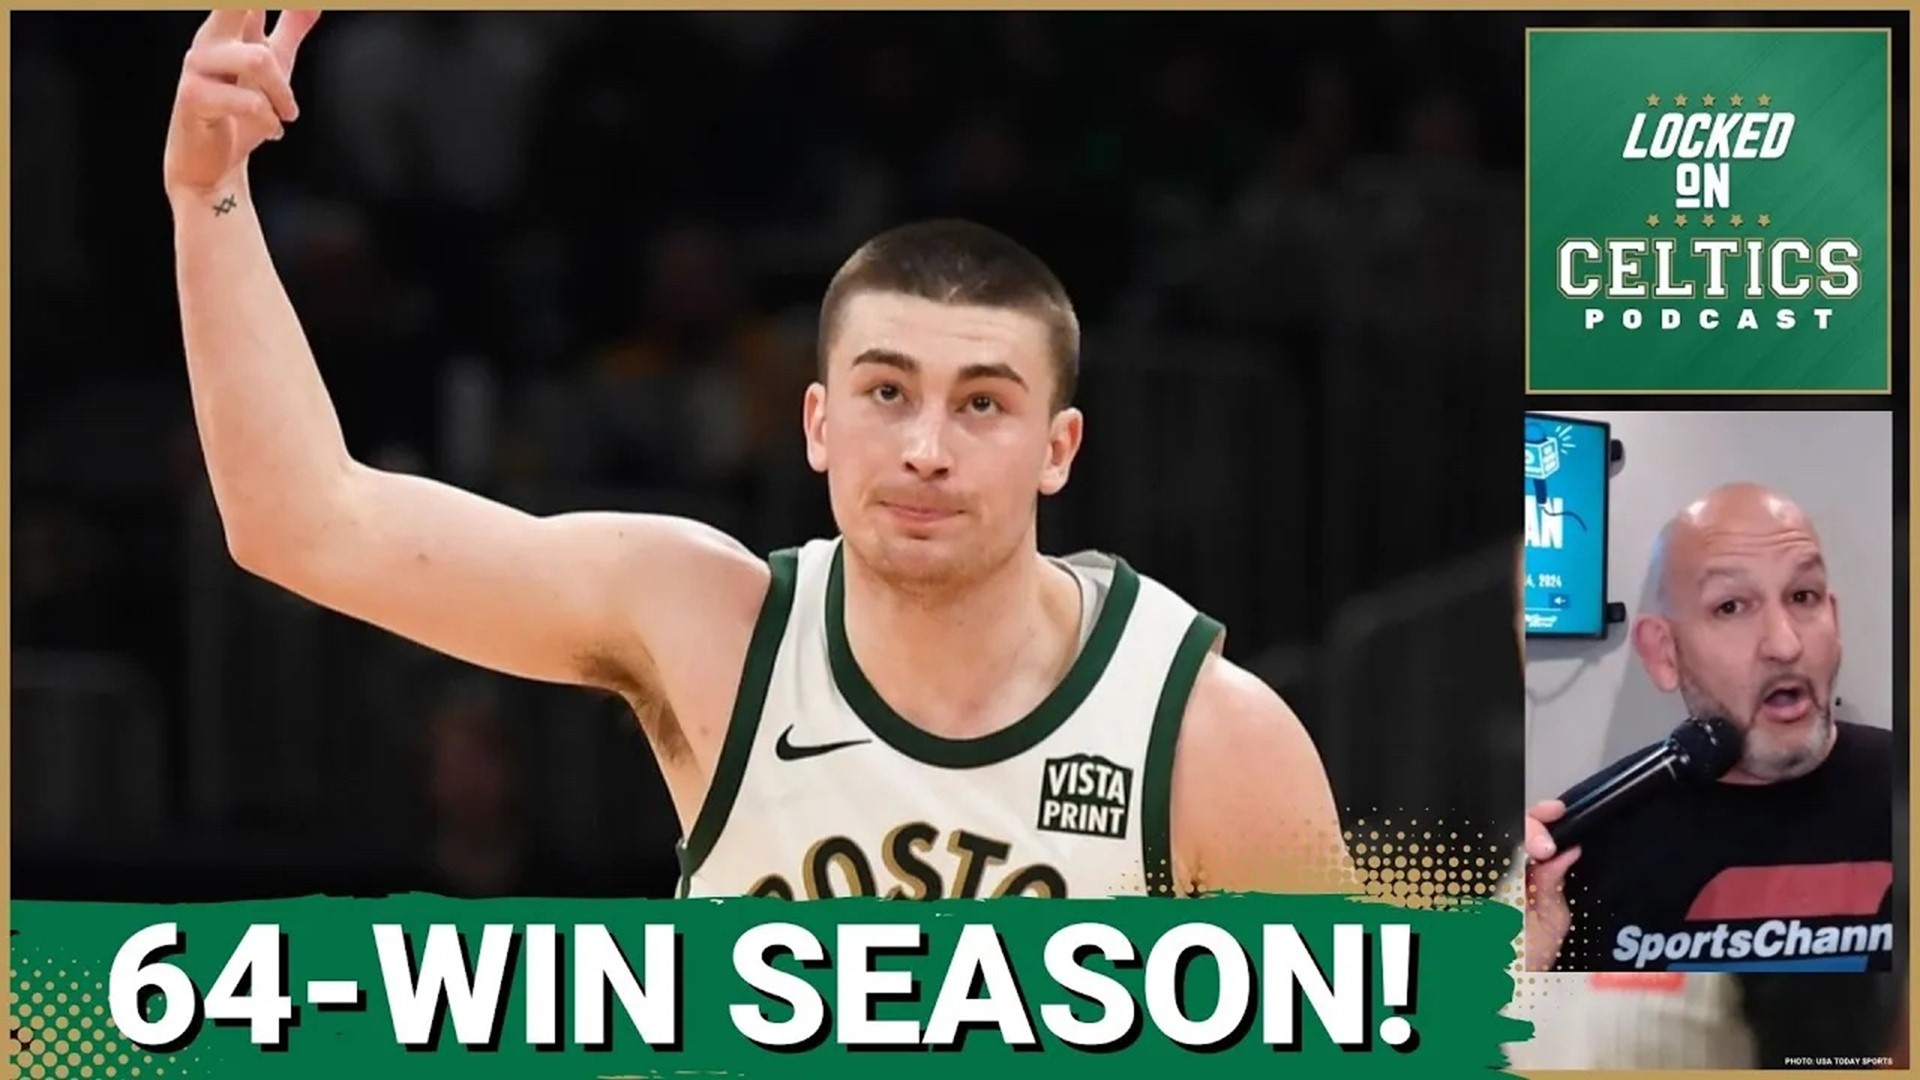 The Boston Celtics wrapped up the season with 64 wins, the fourth-most in team history.